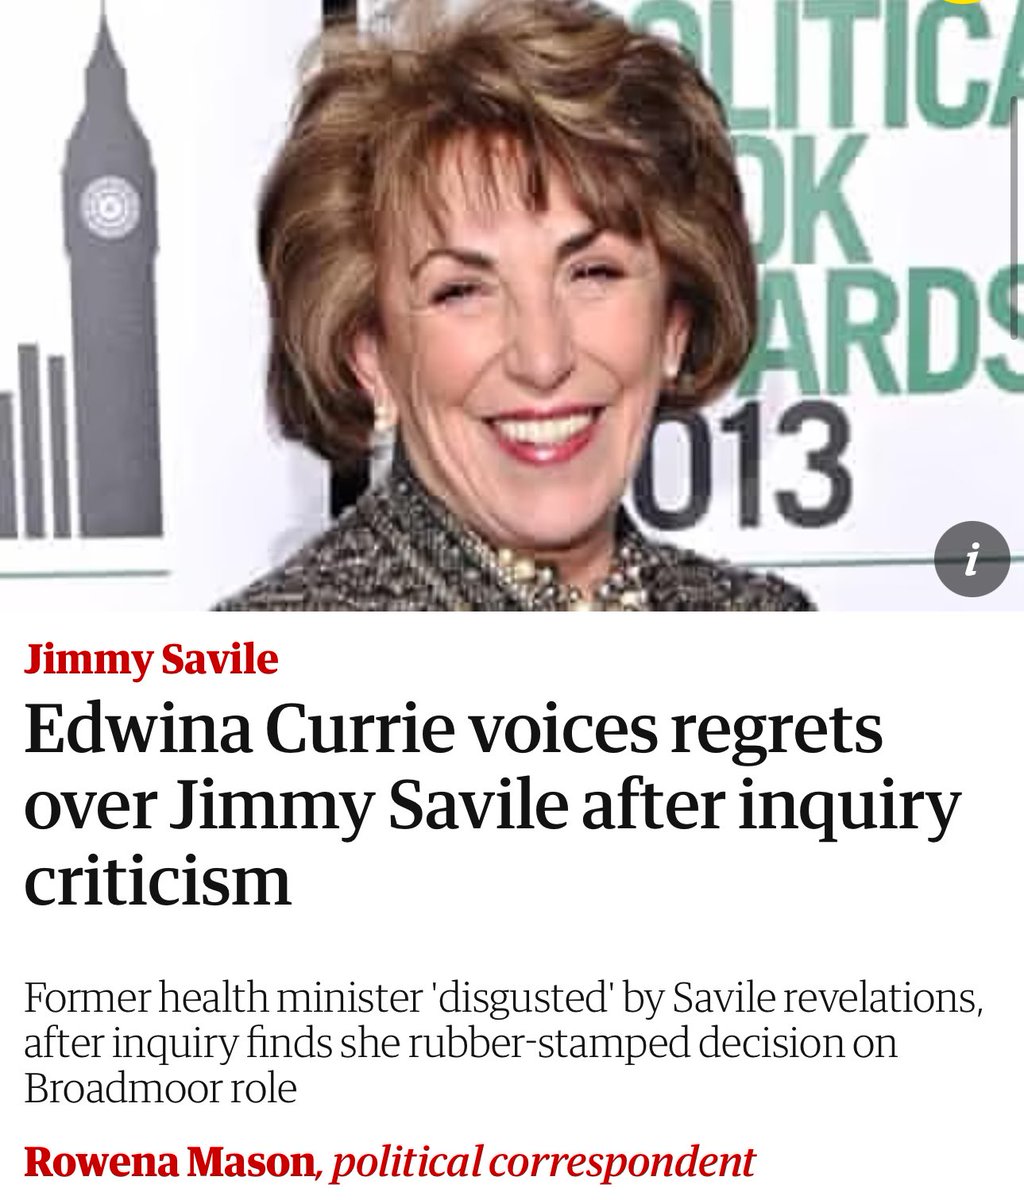 In a discussion about benefits, children and benefits for the most vulnerable in society, the BBC (Talkback) uses disgraced and disingenuous Tory Edwina Currie. The woman who gave Jimmy Savile the keys to Broadmoor, where he sexually assaulted the vulnerable. Awful.